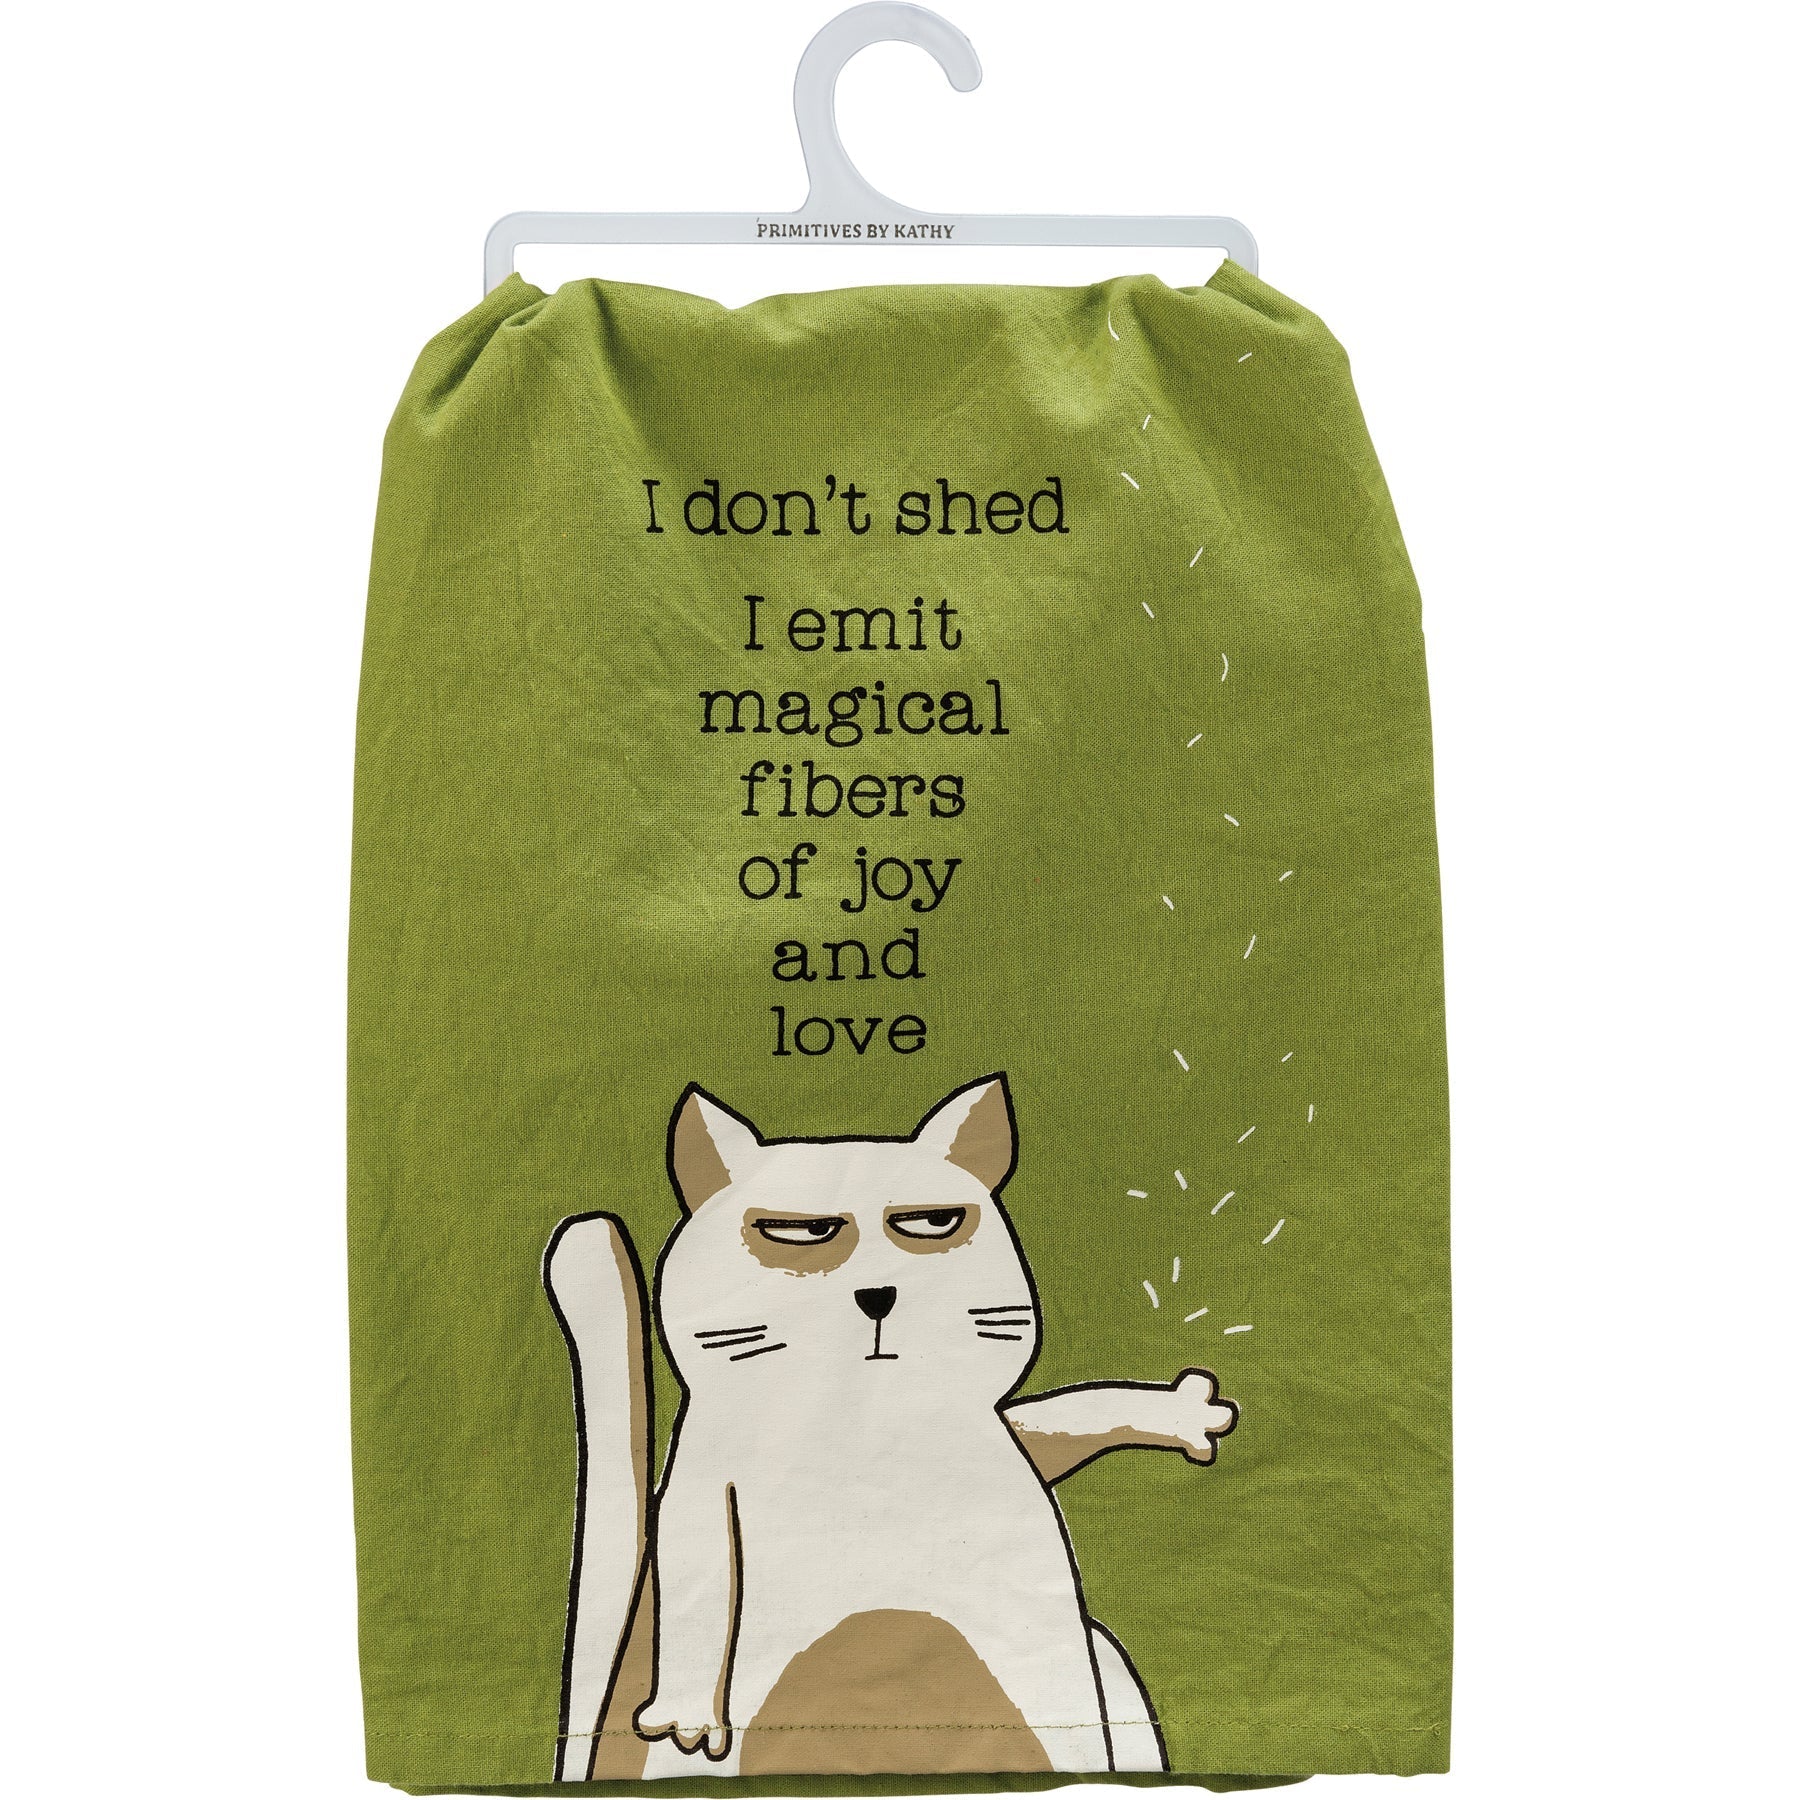 Cat Themed Kitchen Towel withthe words "I don't shed. I emit magical fibers of joy and love."